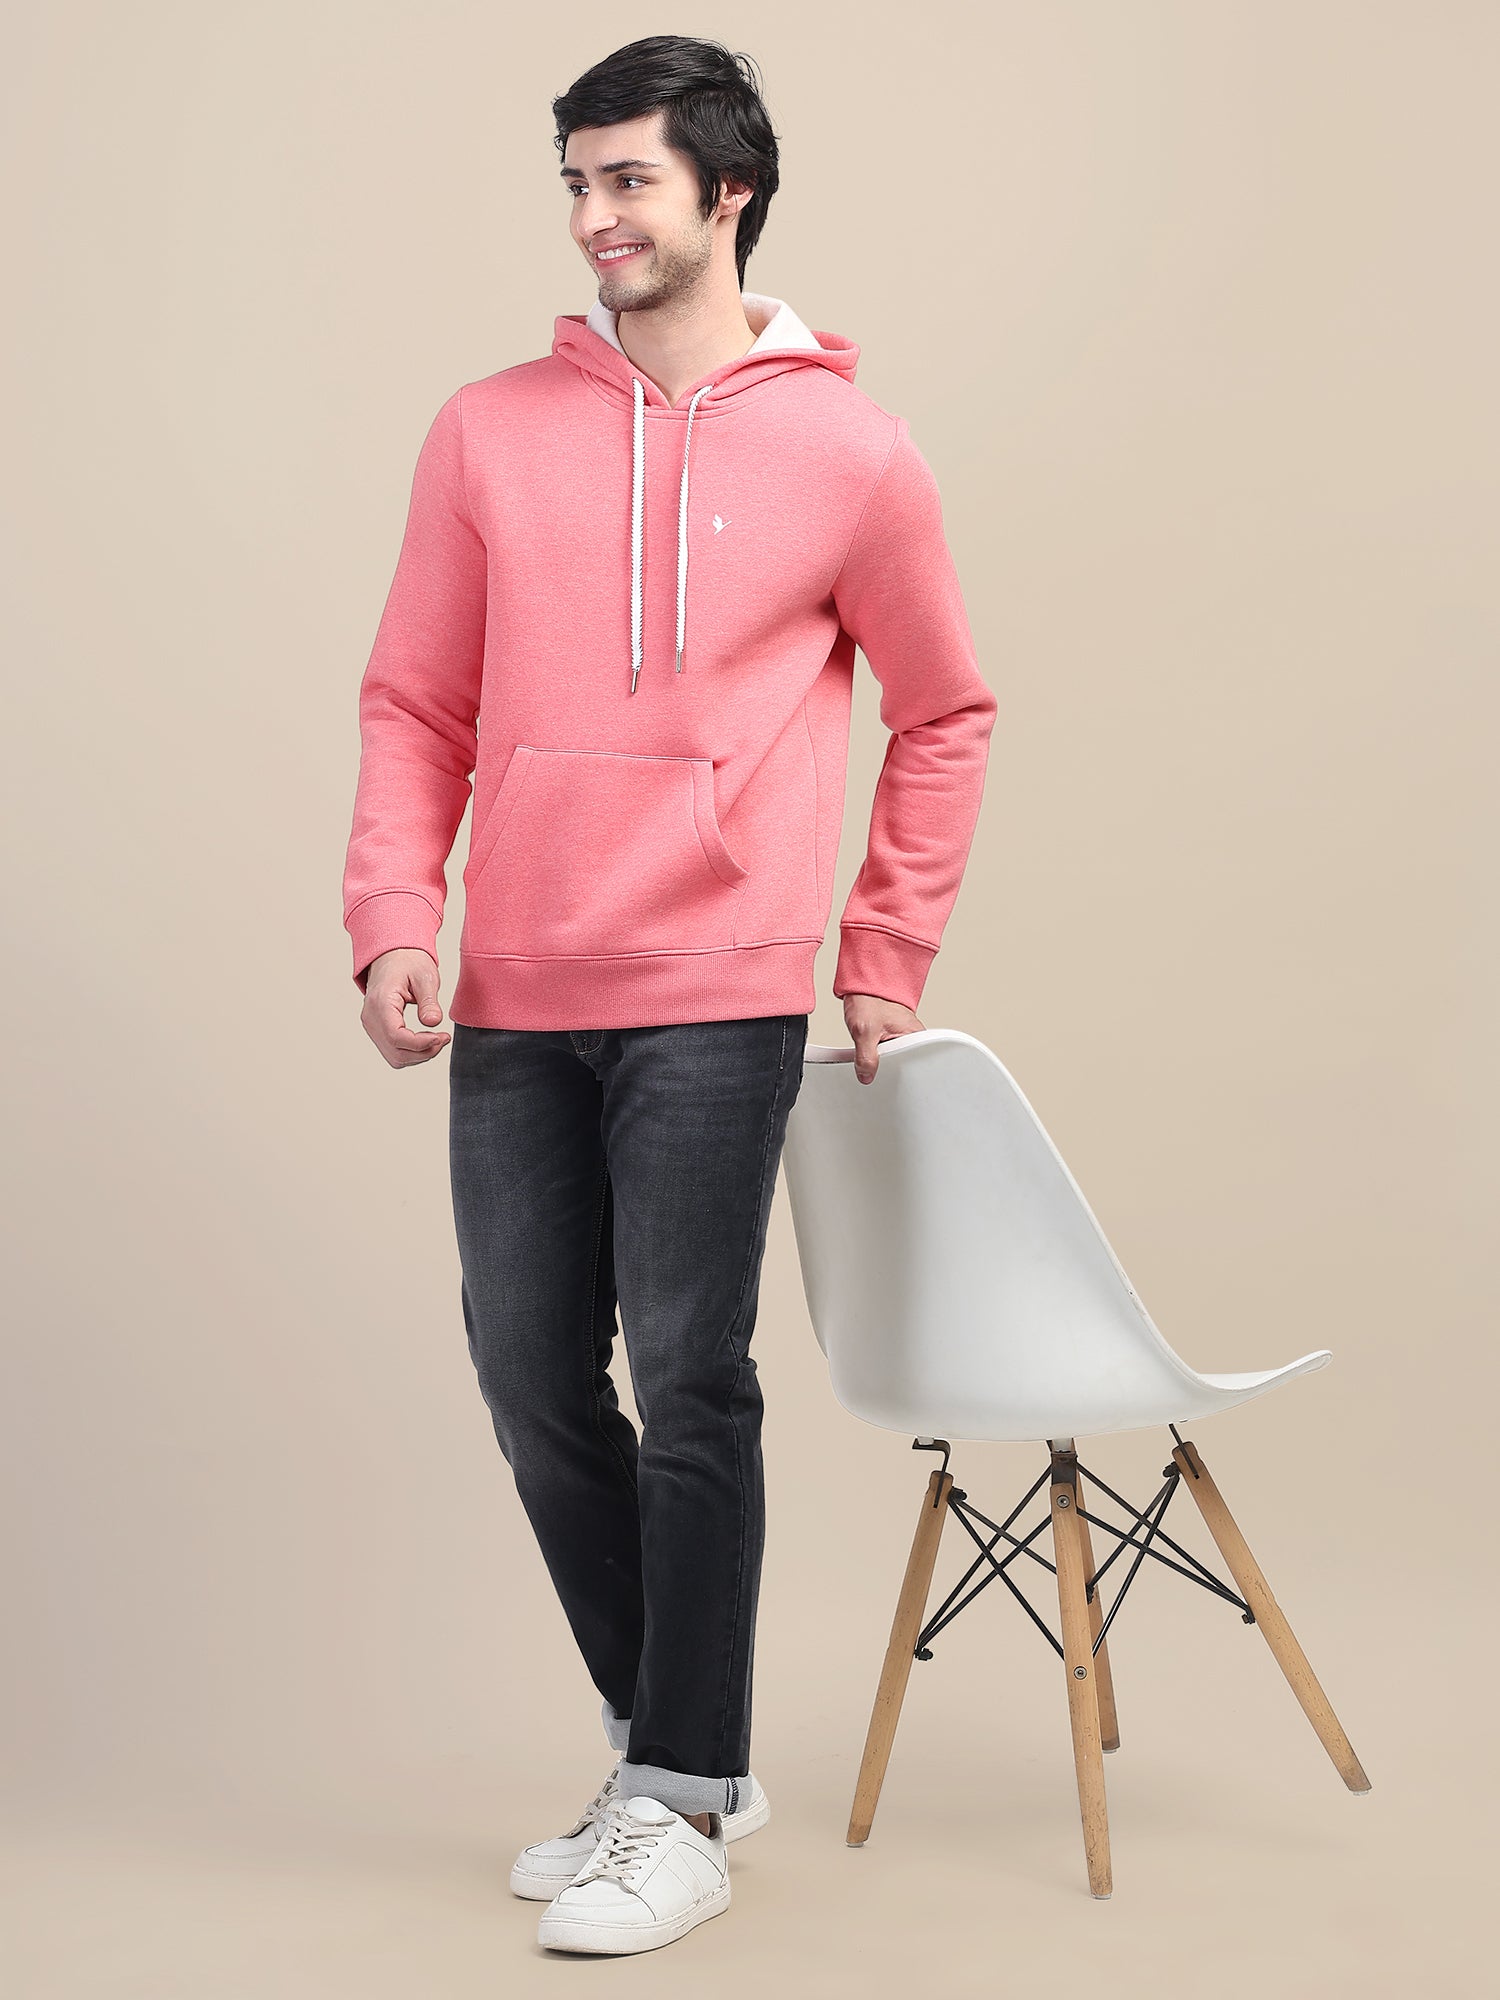 AMSWAN MEN'S PINK STYLISH AND COMFORT FIT HOODIE